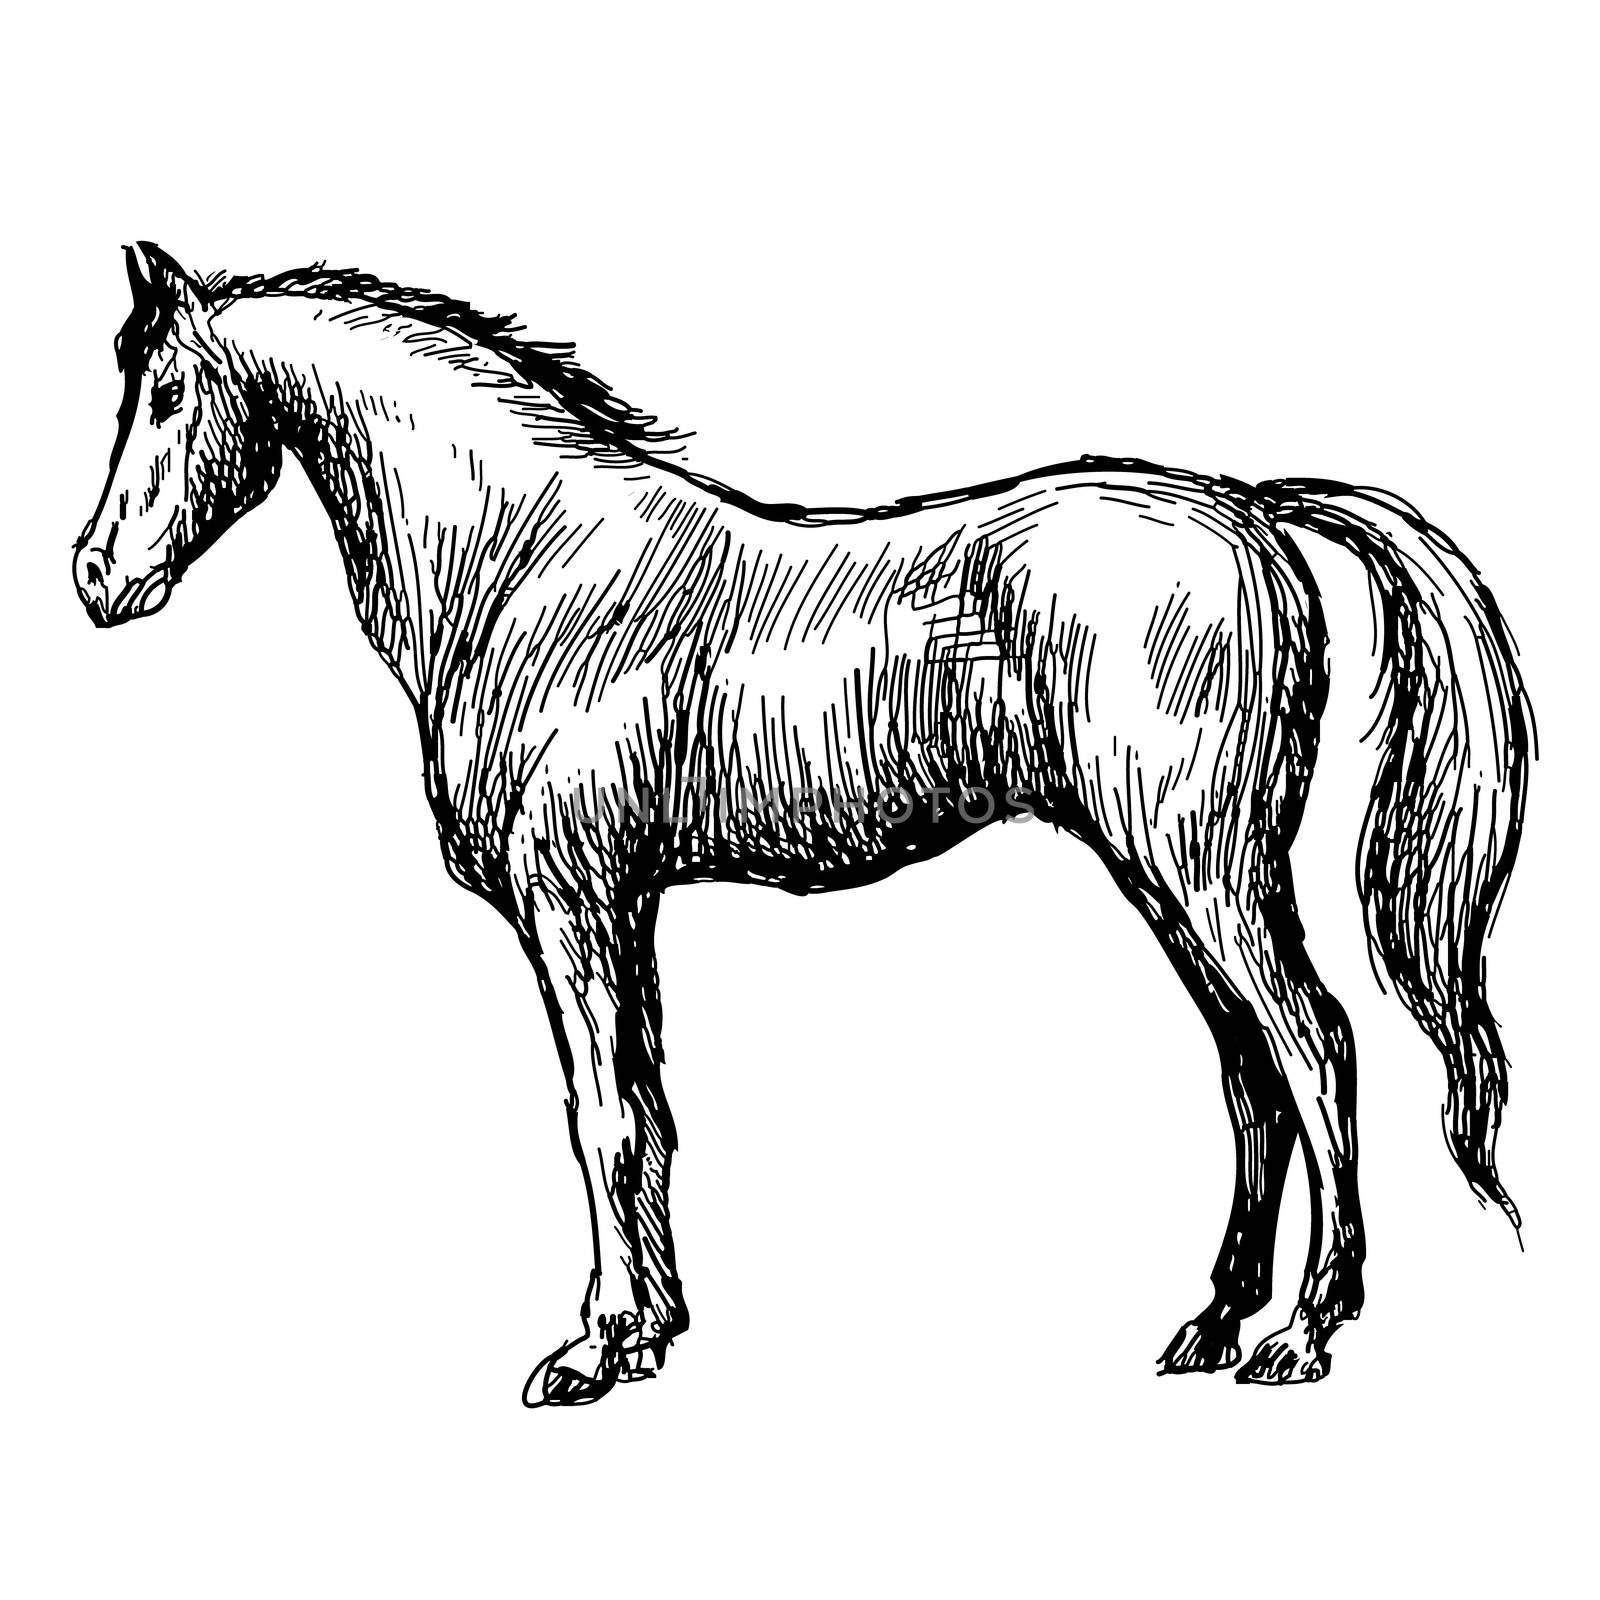 freehand sketch illustration of horse by simpleBE